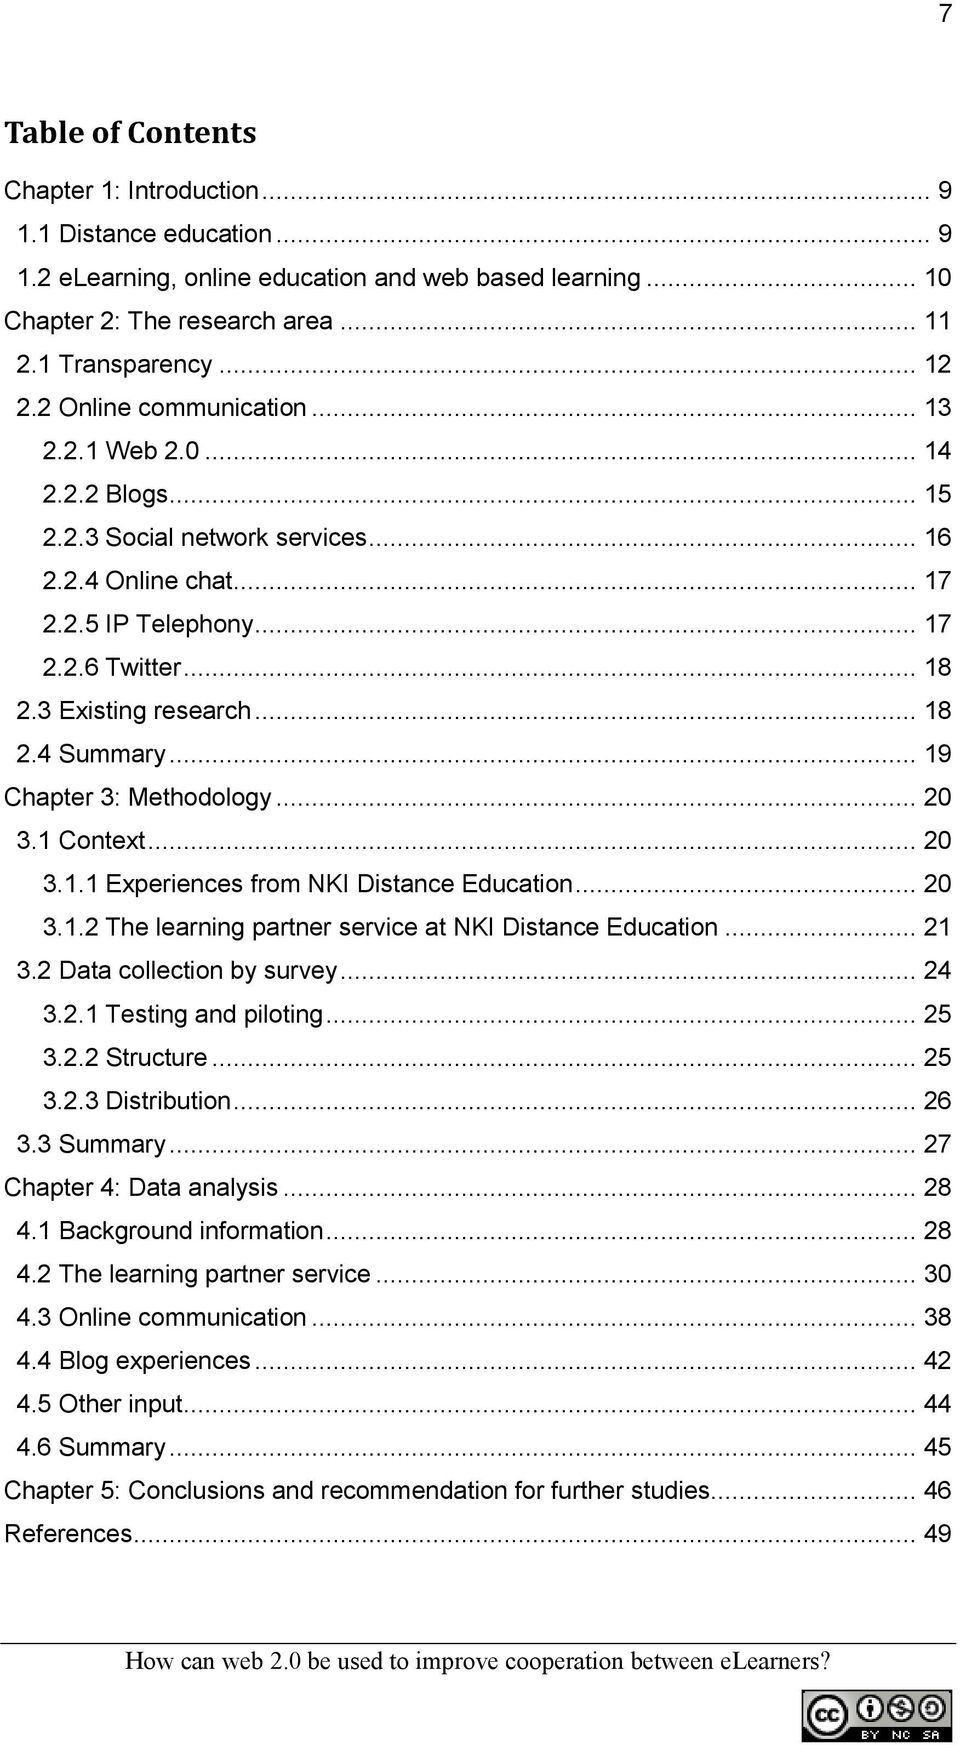 .. 19 Chapter 3: Methodology... 20 3.1 Context... 20 3.1.1 Experiences from NKI Distance Education... 20 3.1.2 The learning partner service at NKI Distance Education... 21 3.